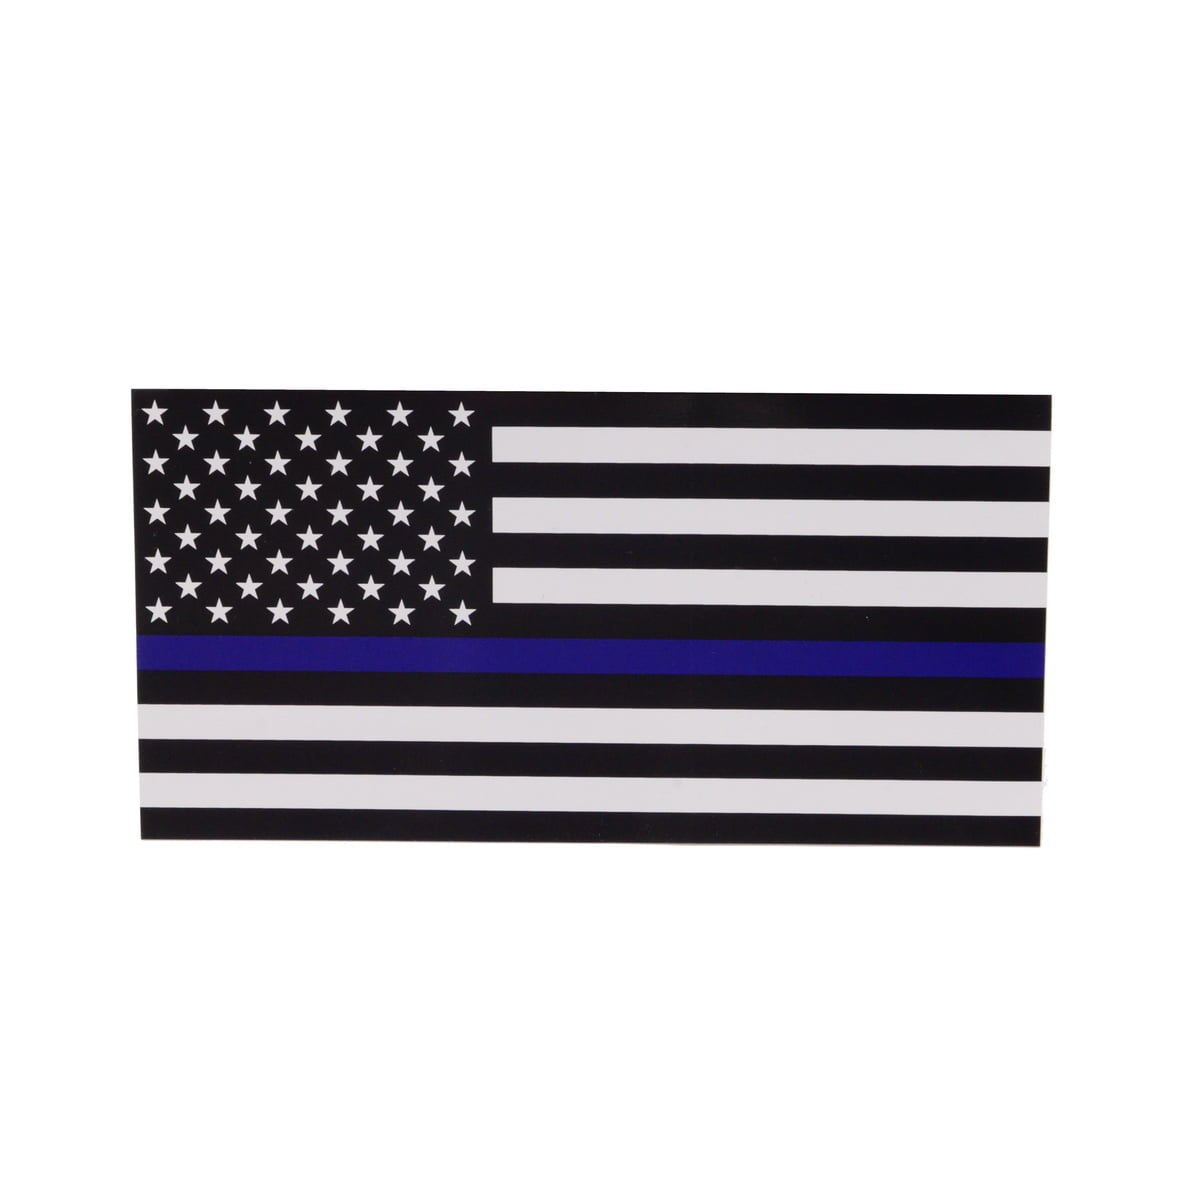 12" THIN BLUE LINE FLAG Window Decal Sticker for Pick Up Truck or SUV Police